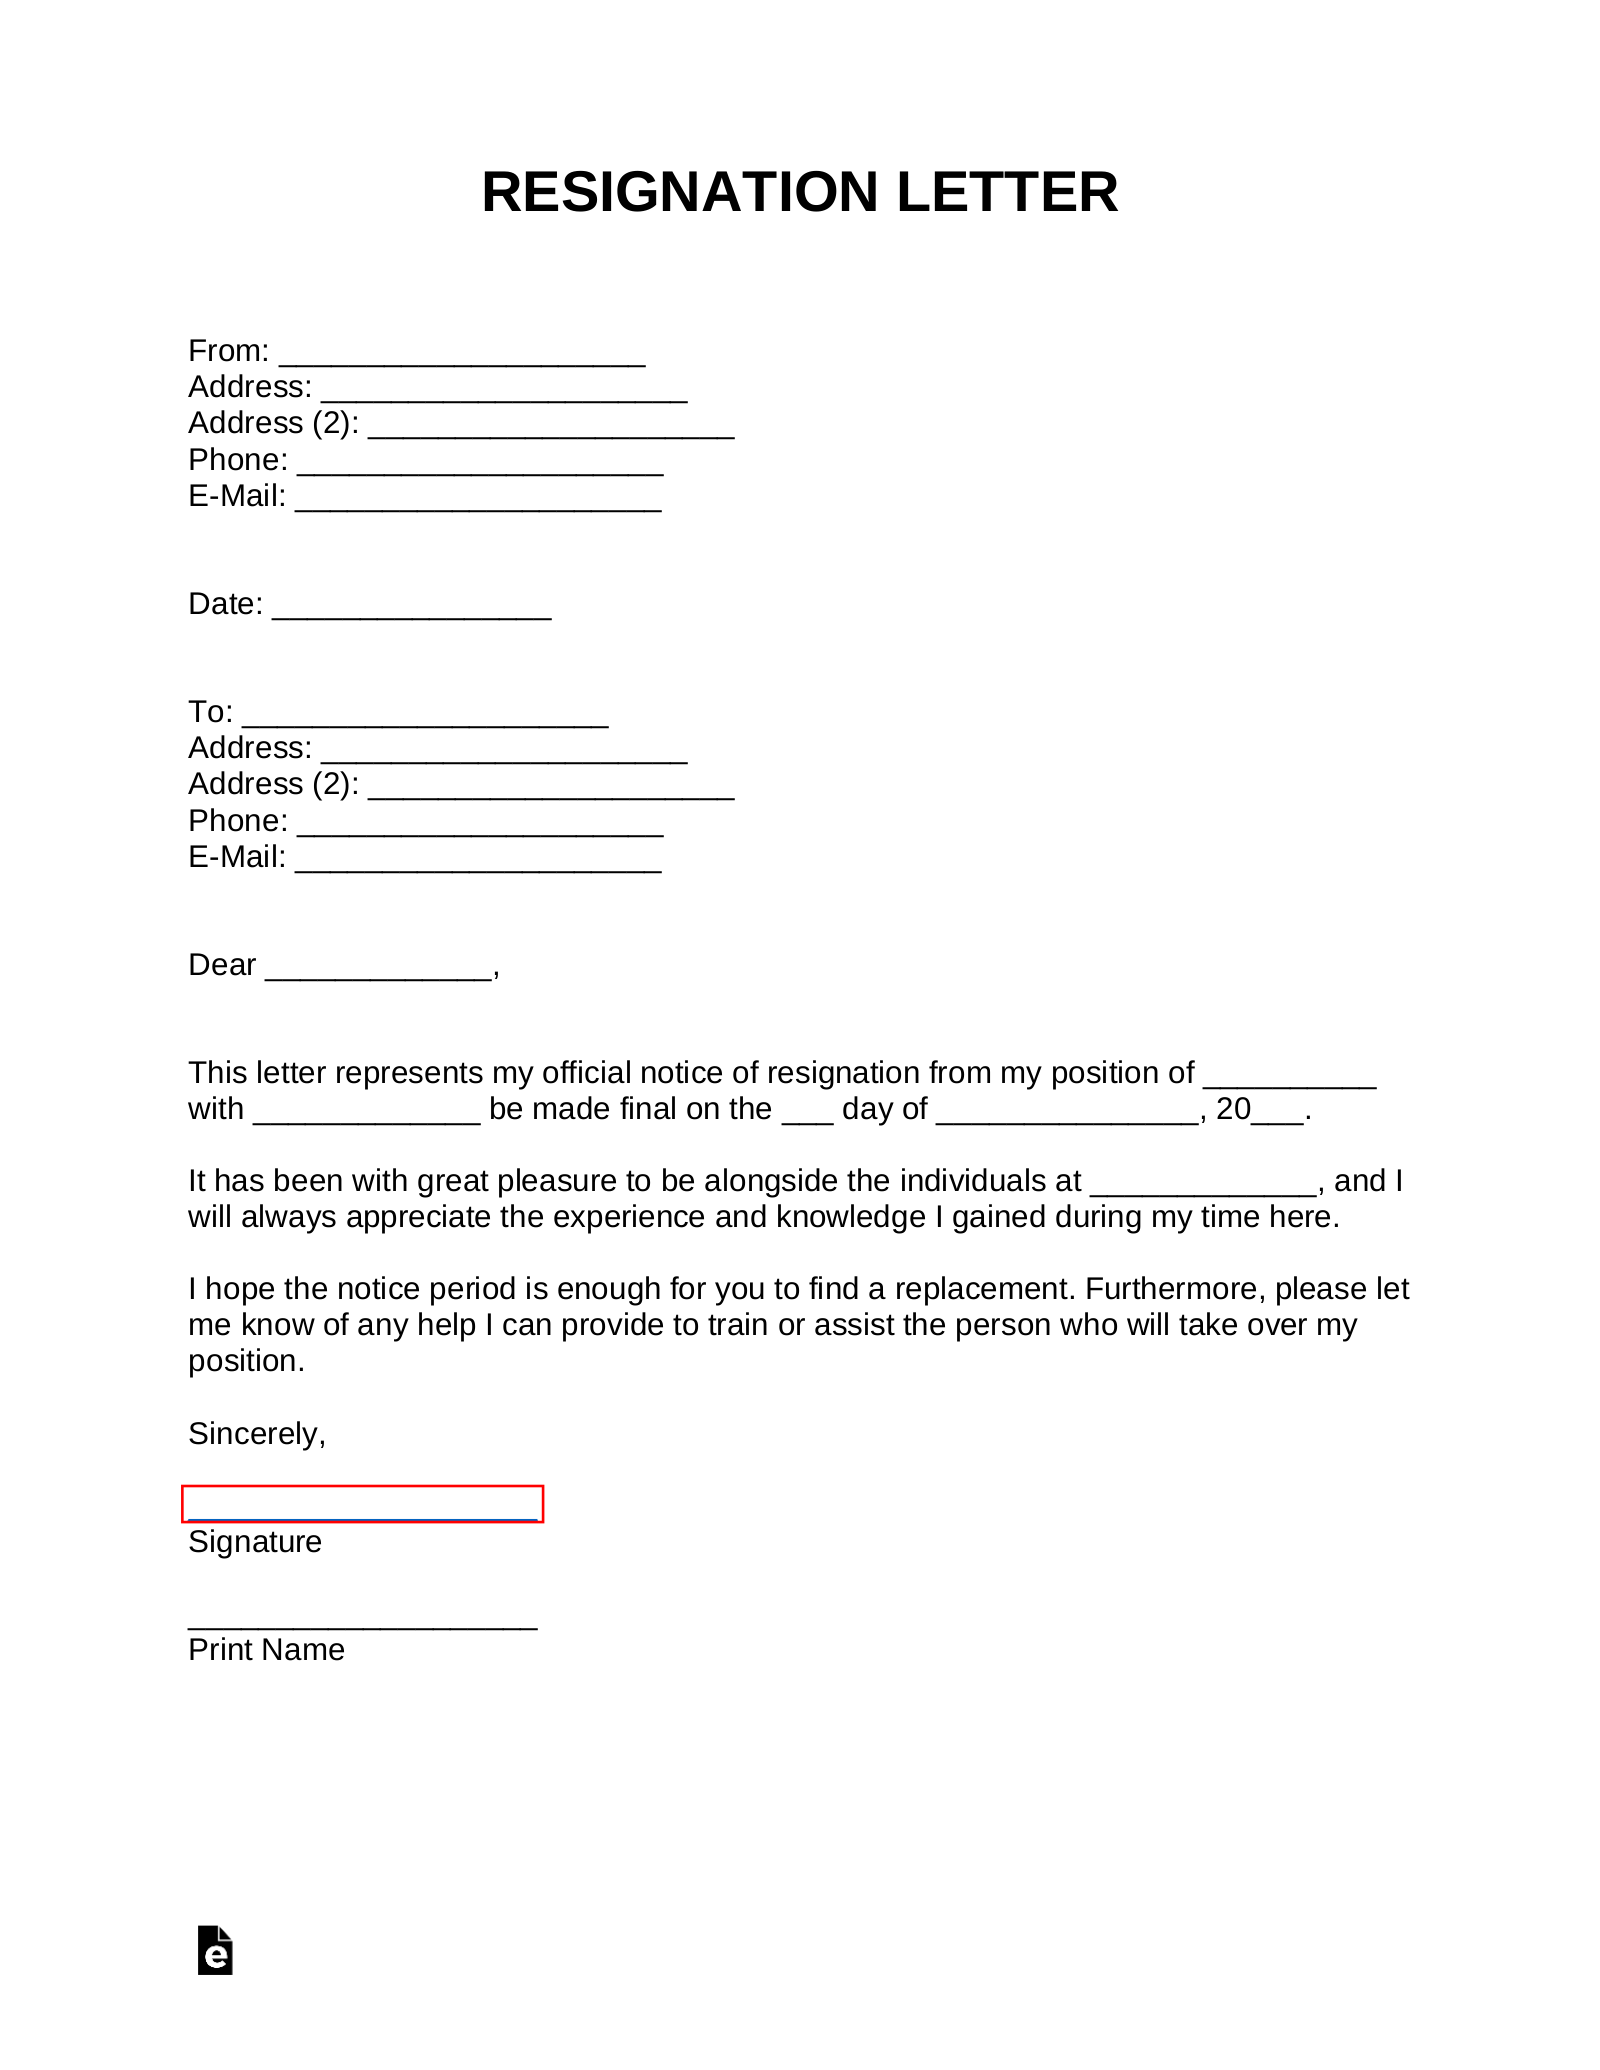 Microsoft Resignation Letter Templates from eforms.com